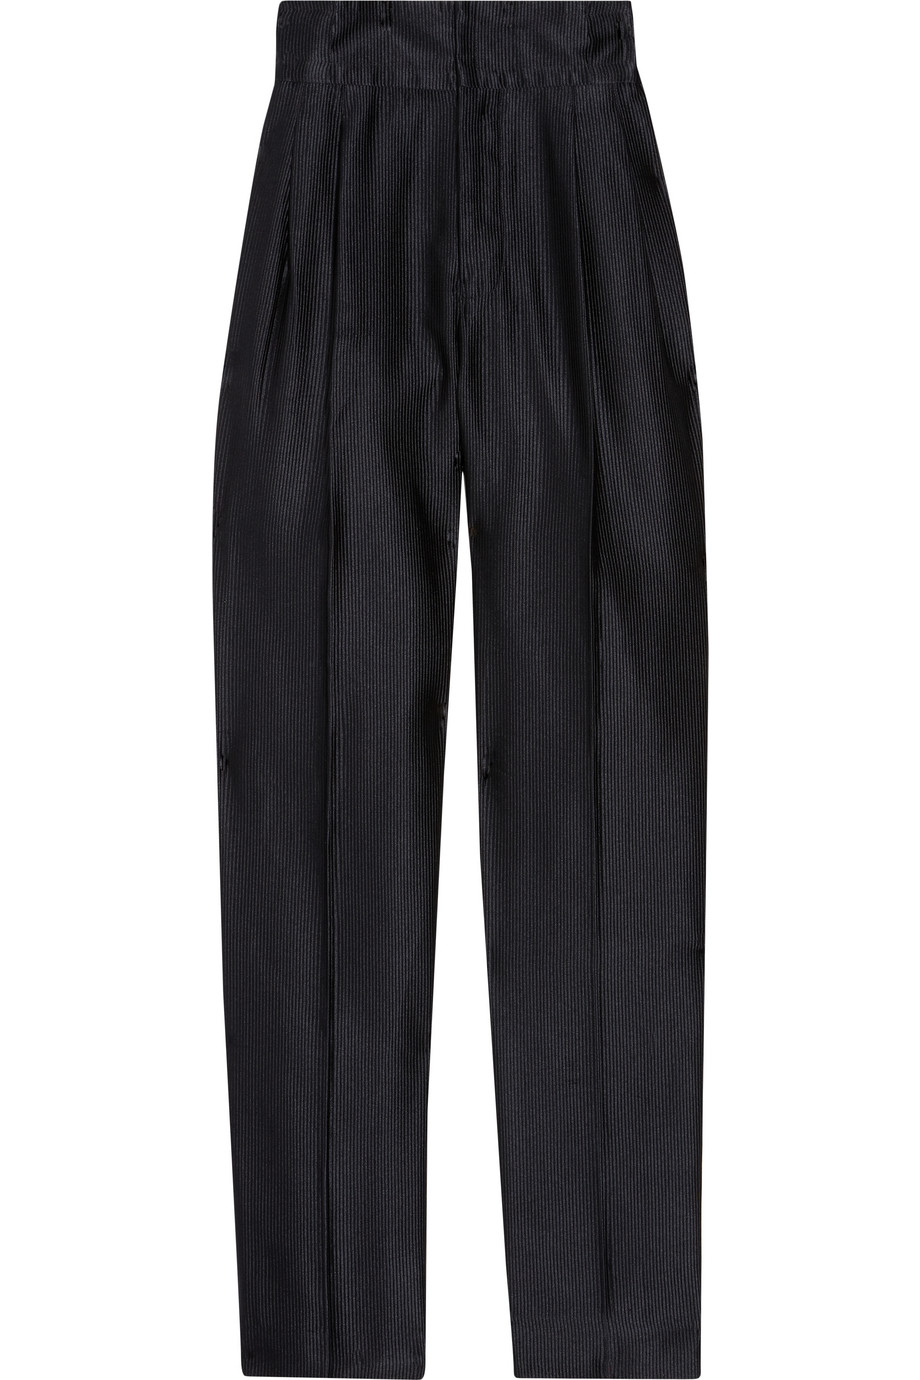 Marc By Marc Jacobs Ava High-waisted Silk-satin Pants in Black | Lyst